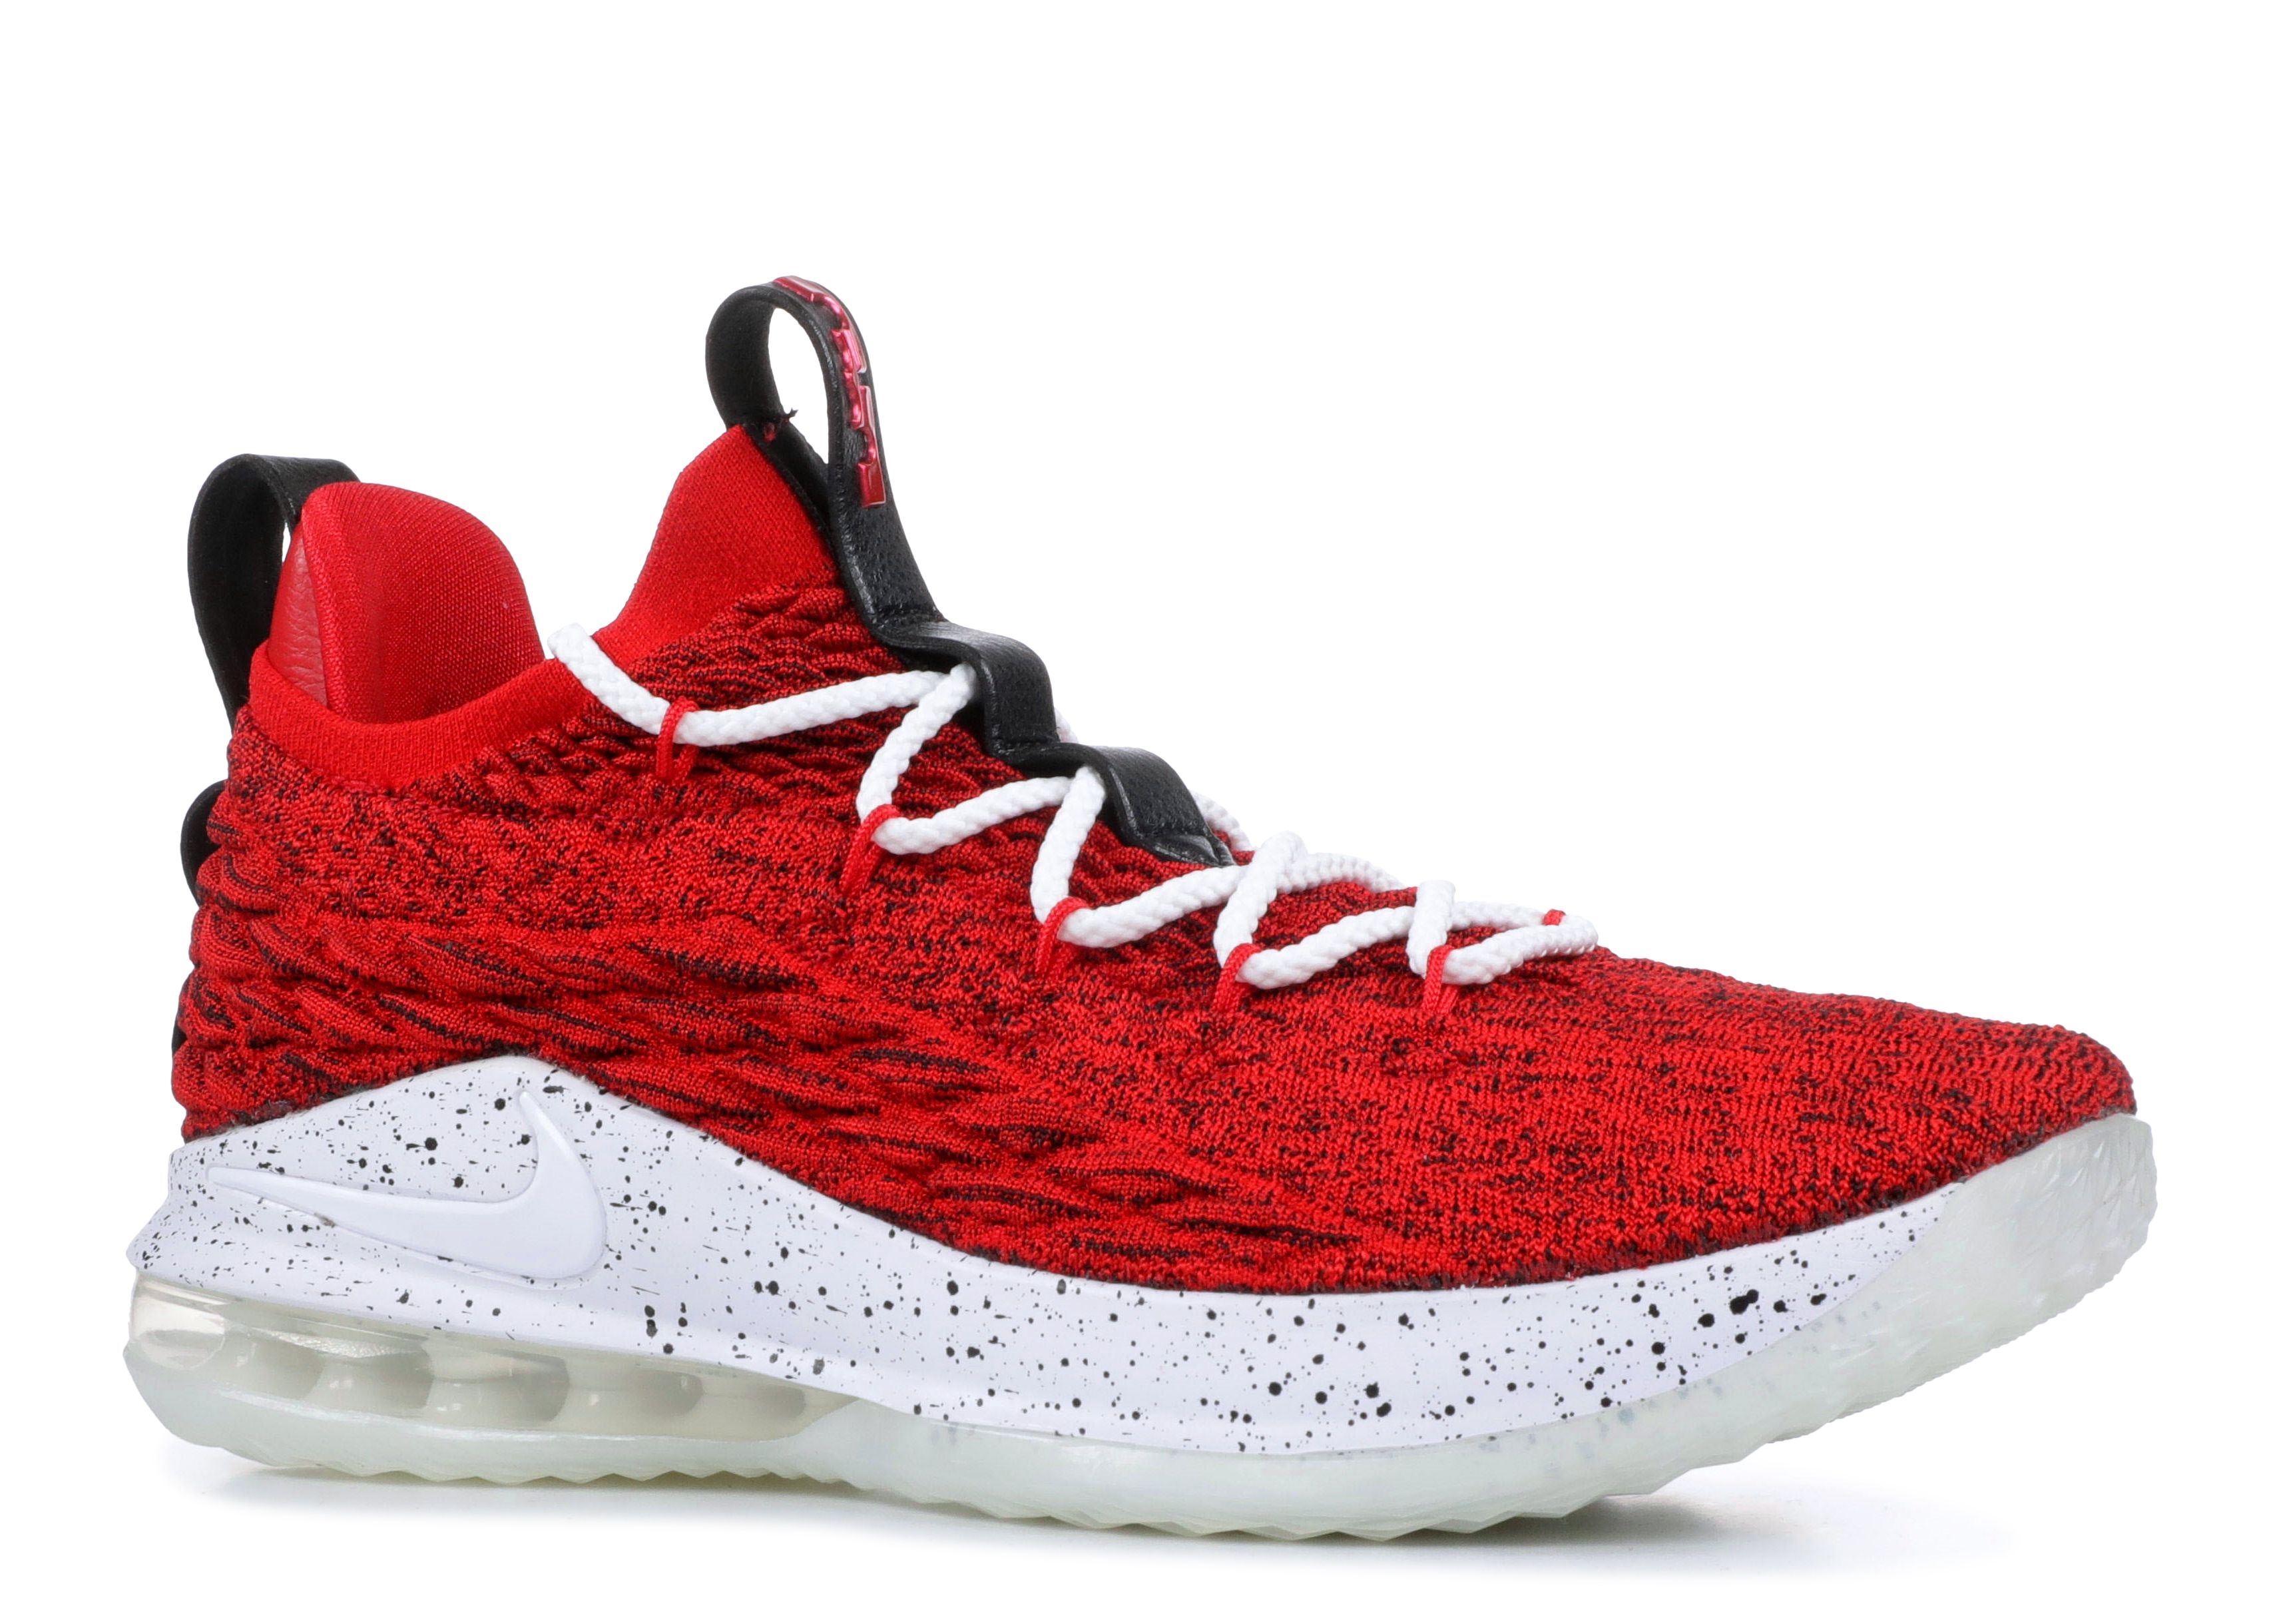 lebron 15 low red and black